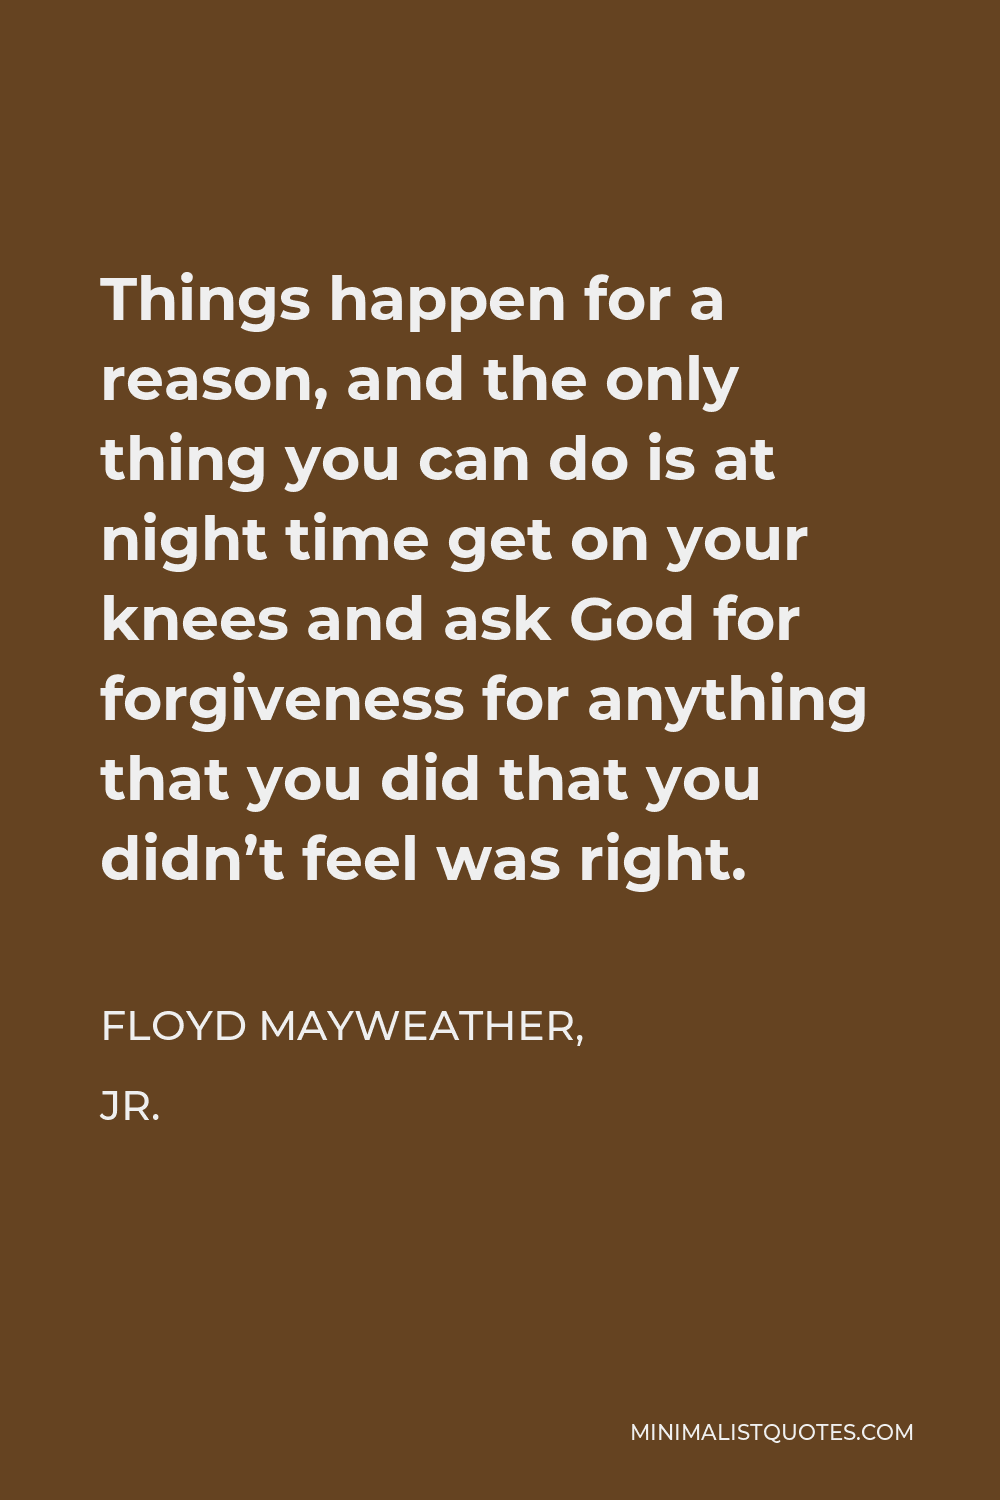 Floyd Mayweather, Jr. Quote - Things happen for a reason, and the only thing you can do is at night time get on your knees and ask God for forgiveness for anything that you did that you didn’t feel was right.